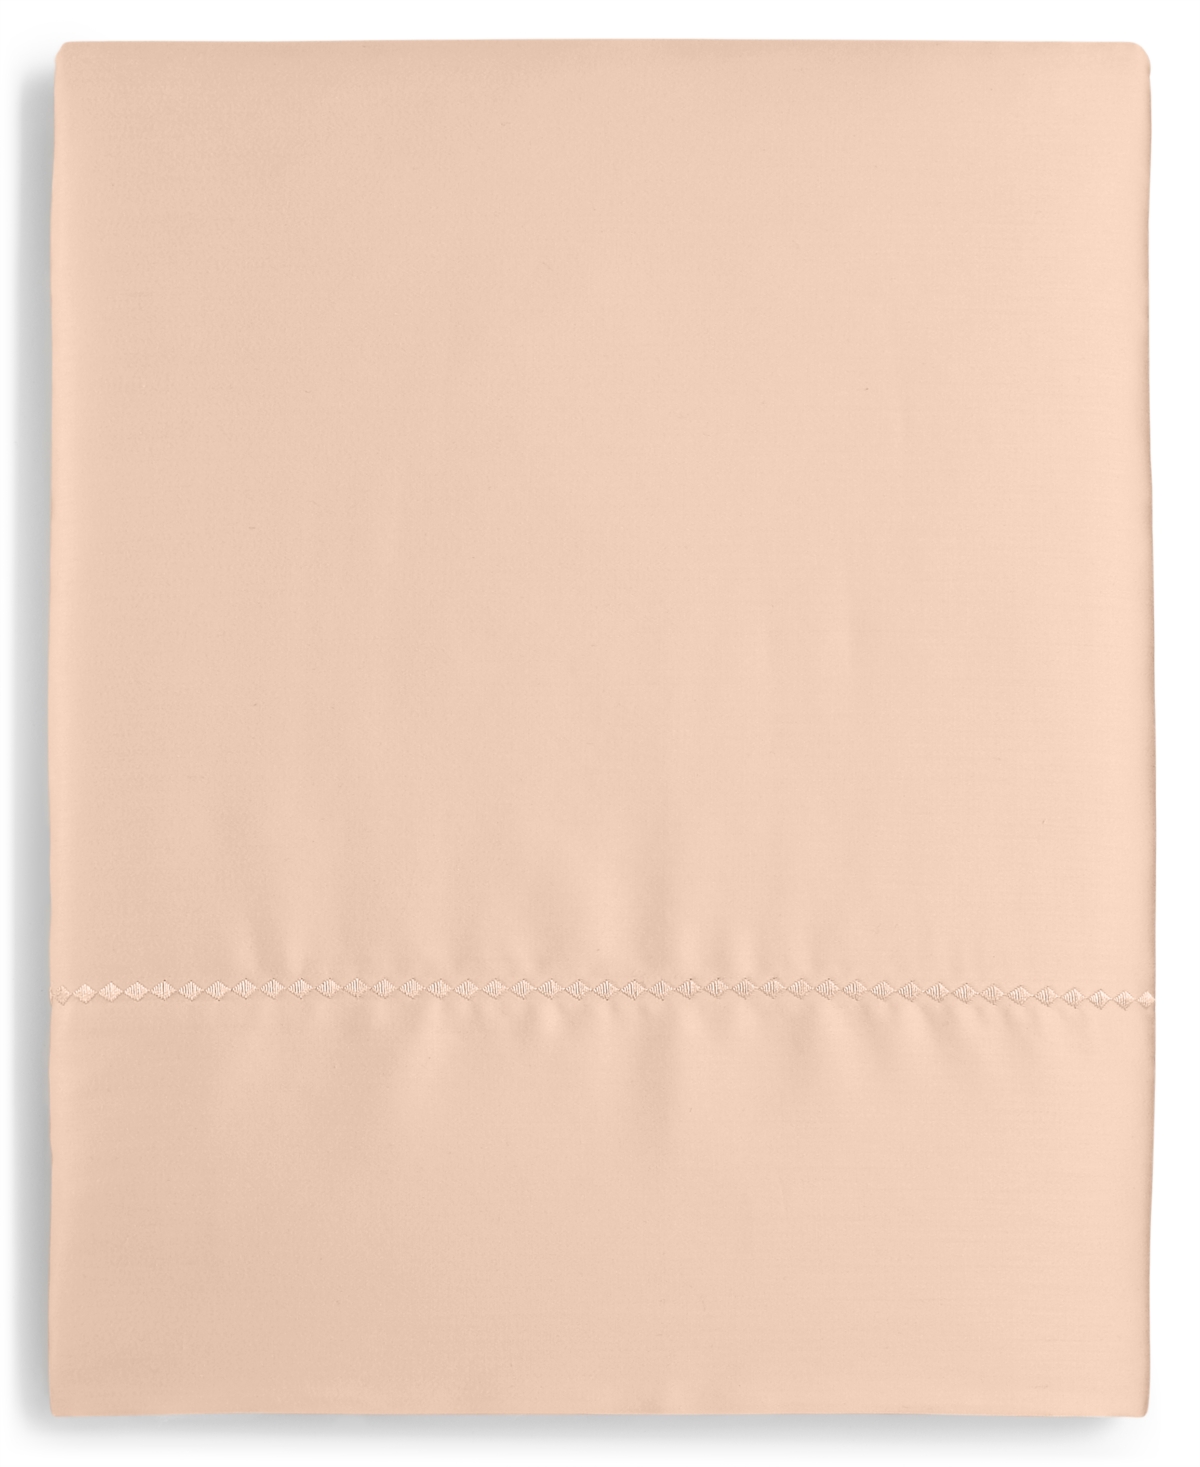 MARTHA STEWART COLLECTION CLOSEOUT! MARTHA STEWART COLLECTION OPEN STOCK SOLID 400 THREAD COUNT COTTON SATEEN FLAT SHEET, QUEE